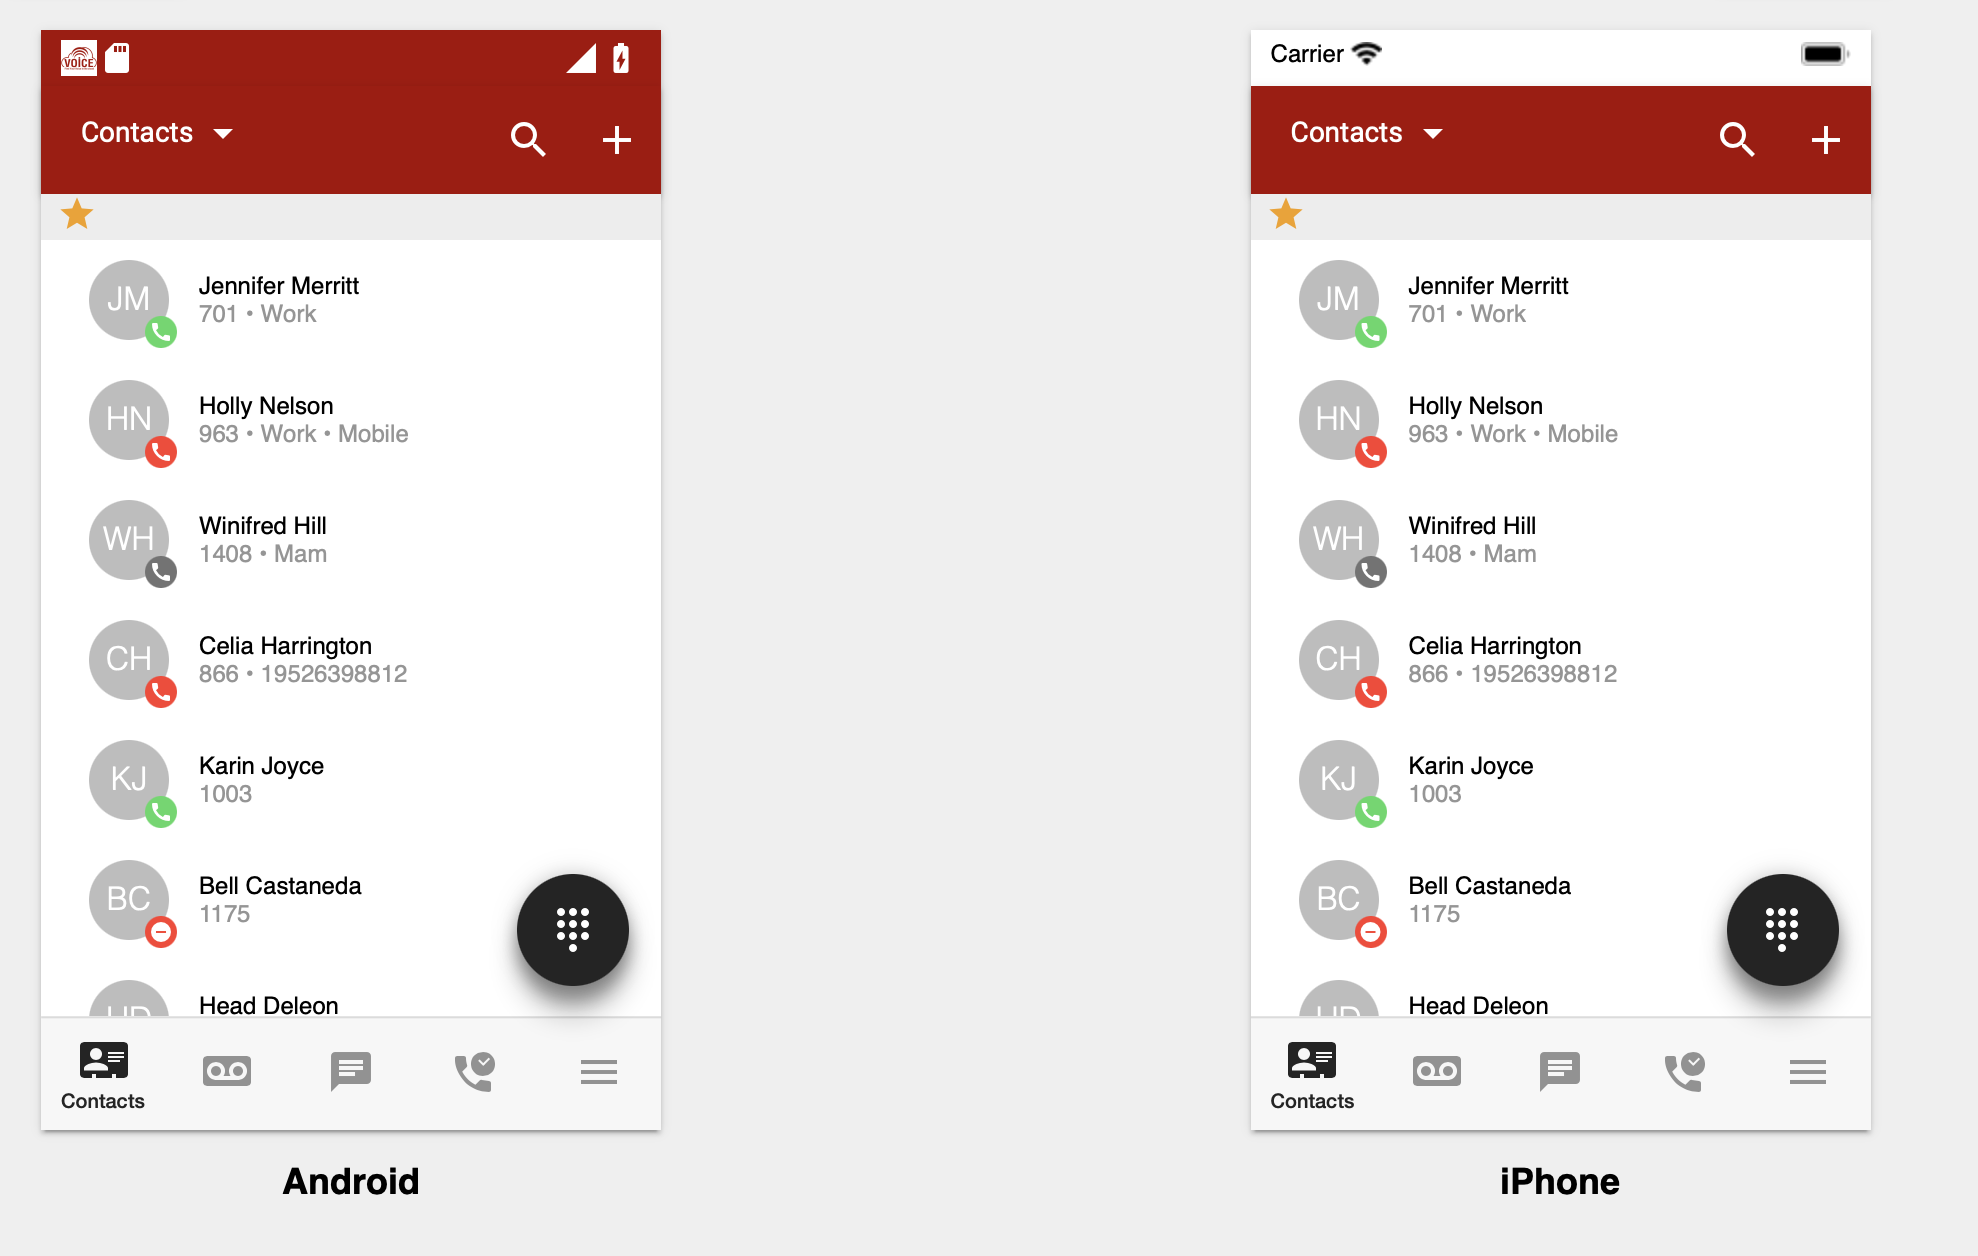 AbsoluteVOICE Android and iPhone Contacts Screens